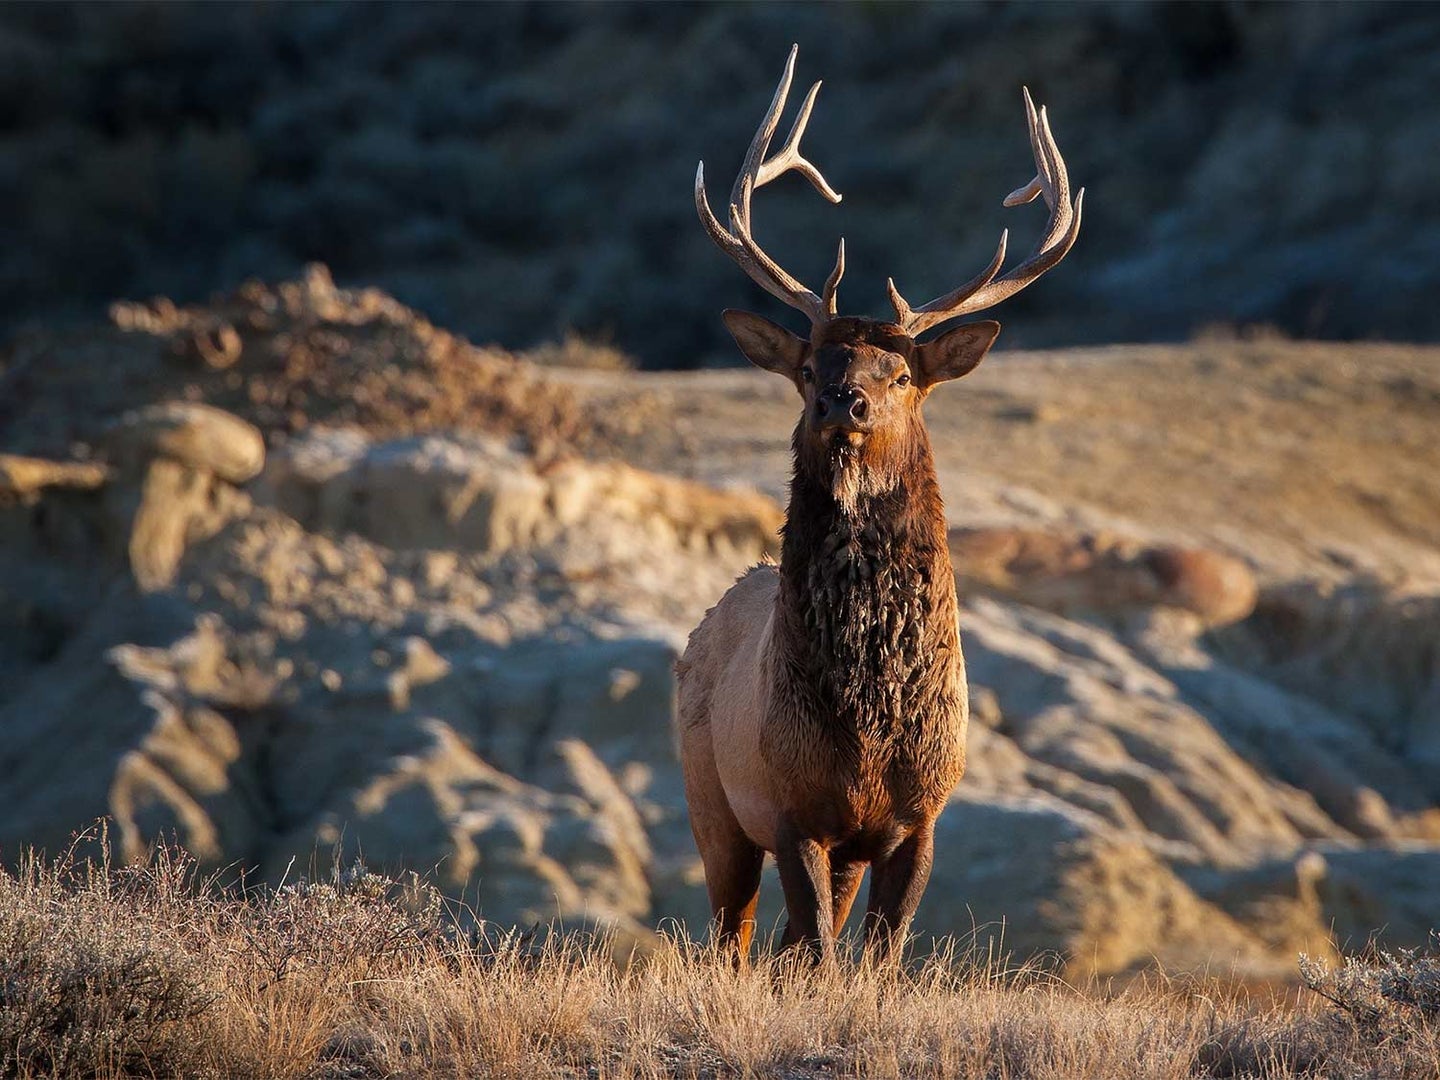 A large bull elk walks through an open field with a rocky hillside in the distance.